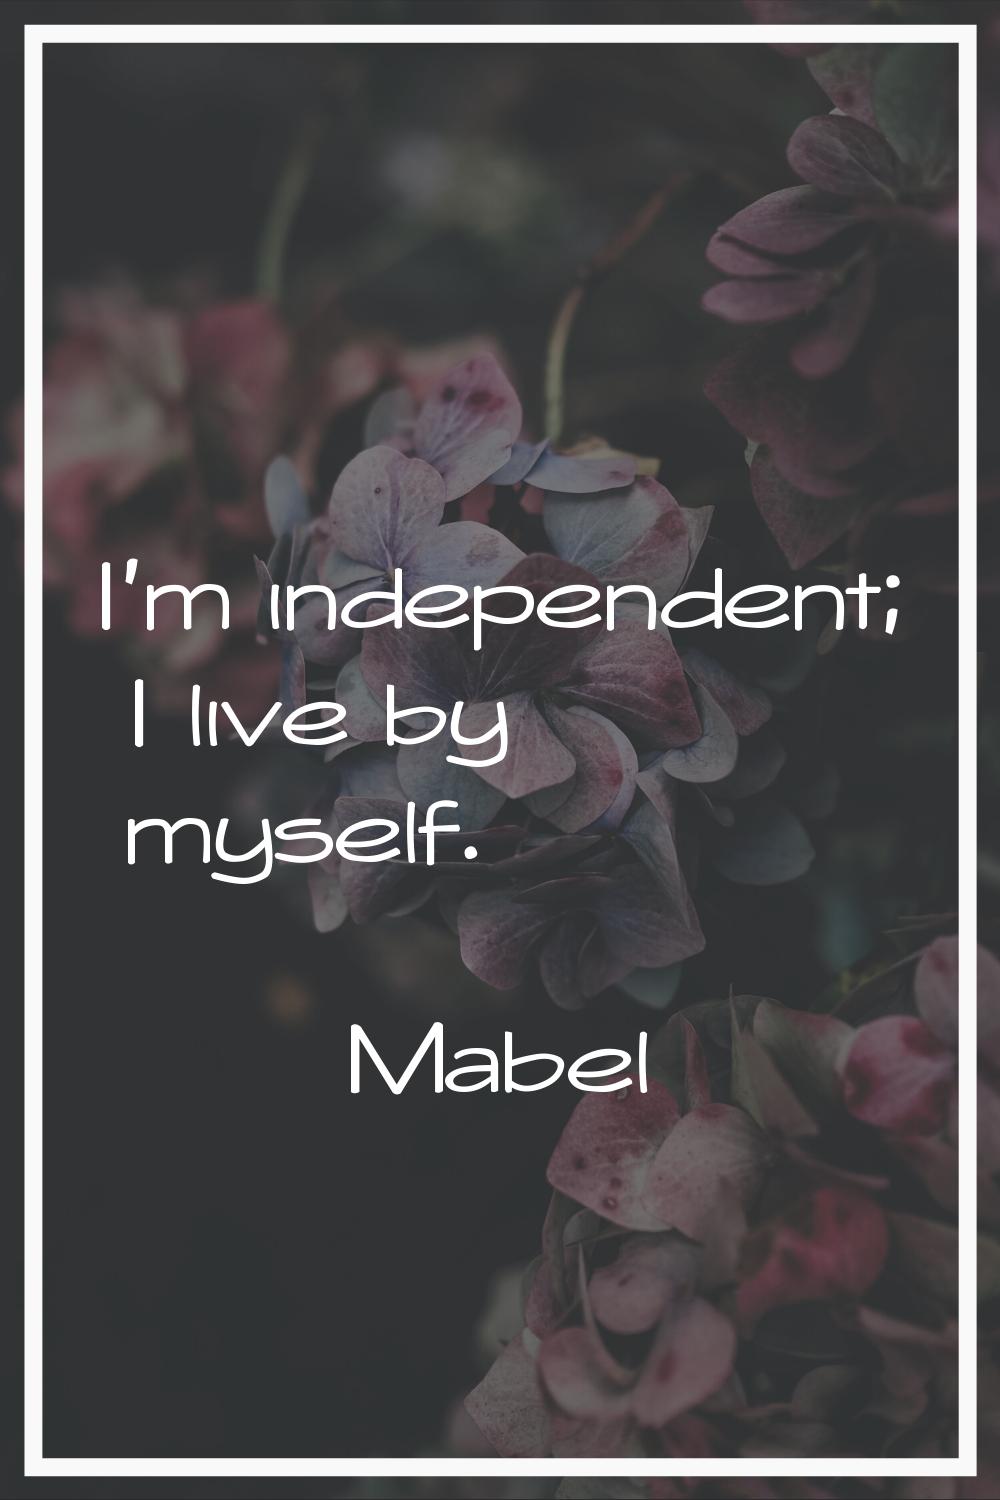 I'm independent; I live by myself.